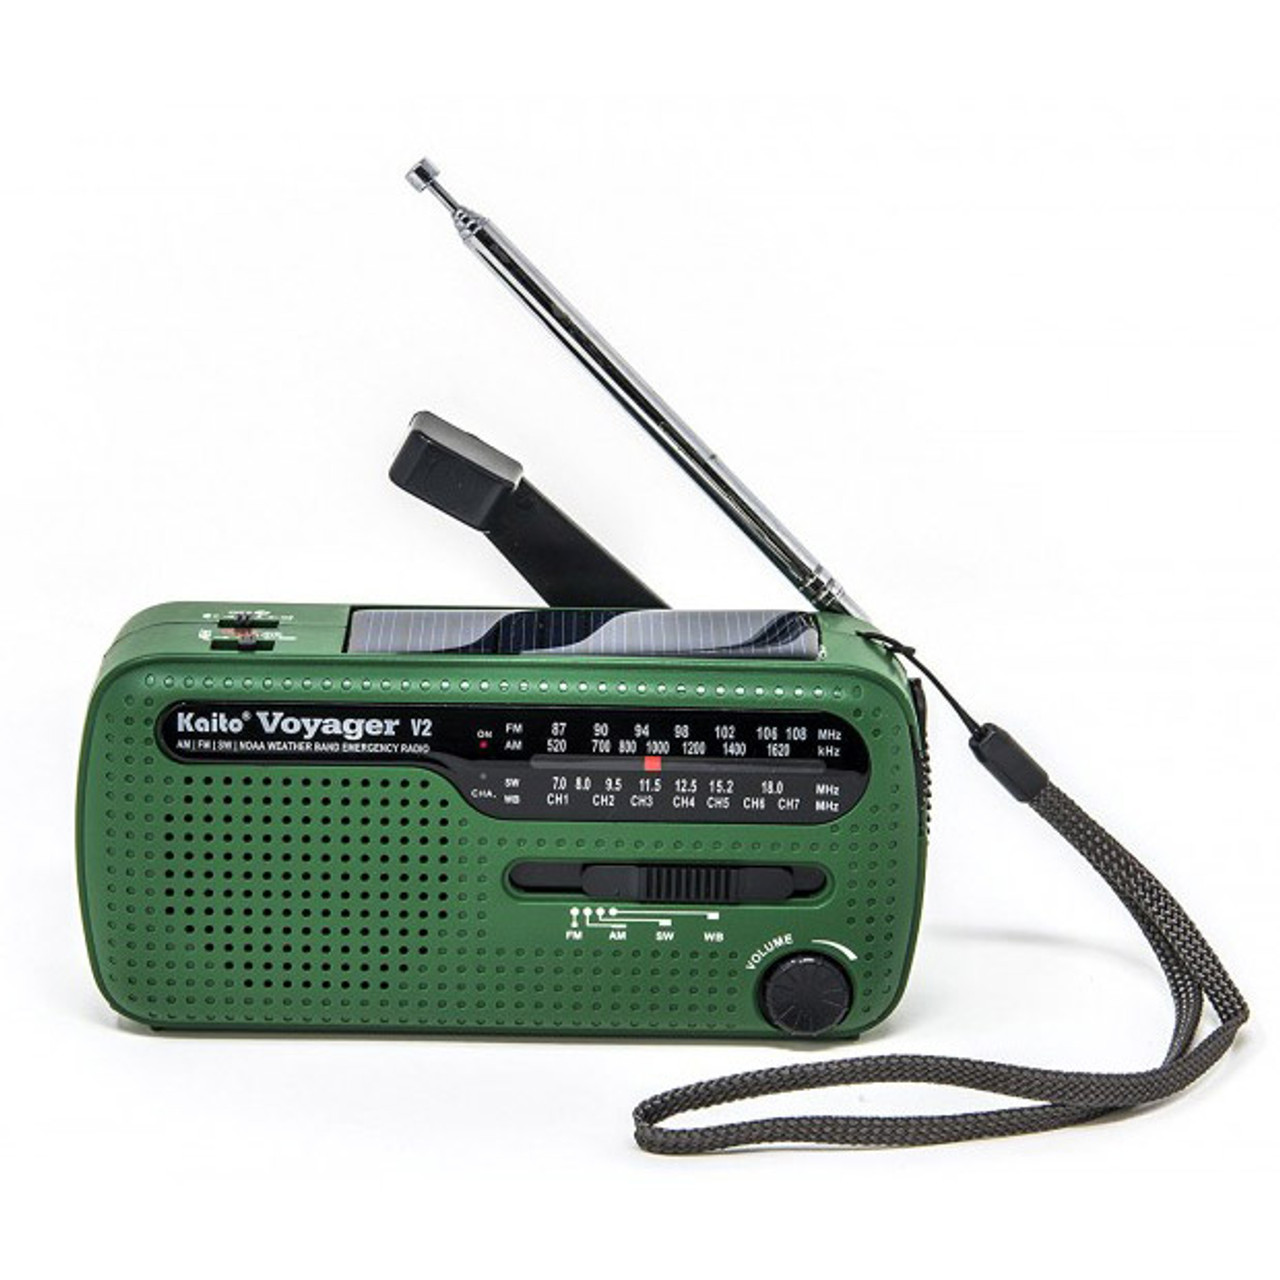 Emergency Radio with NOAA Weather Alert, Portable Solar Hand Crank AM/FM  Radio for Survival,Rechargeable Battery Powered Radio,USB